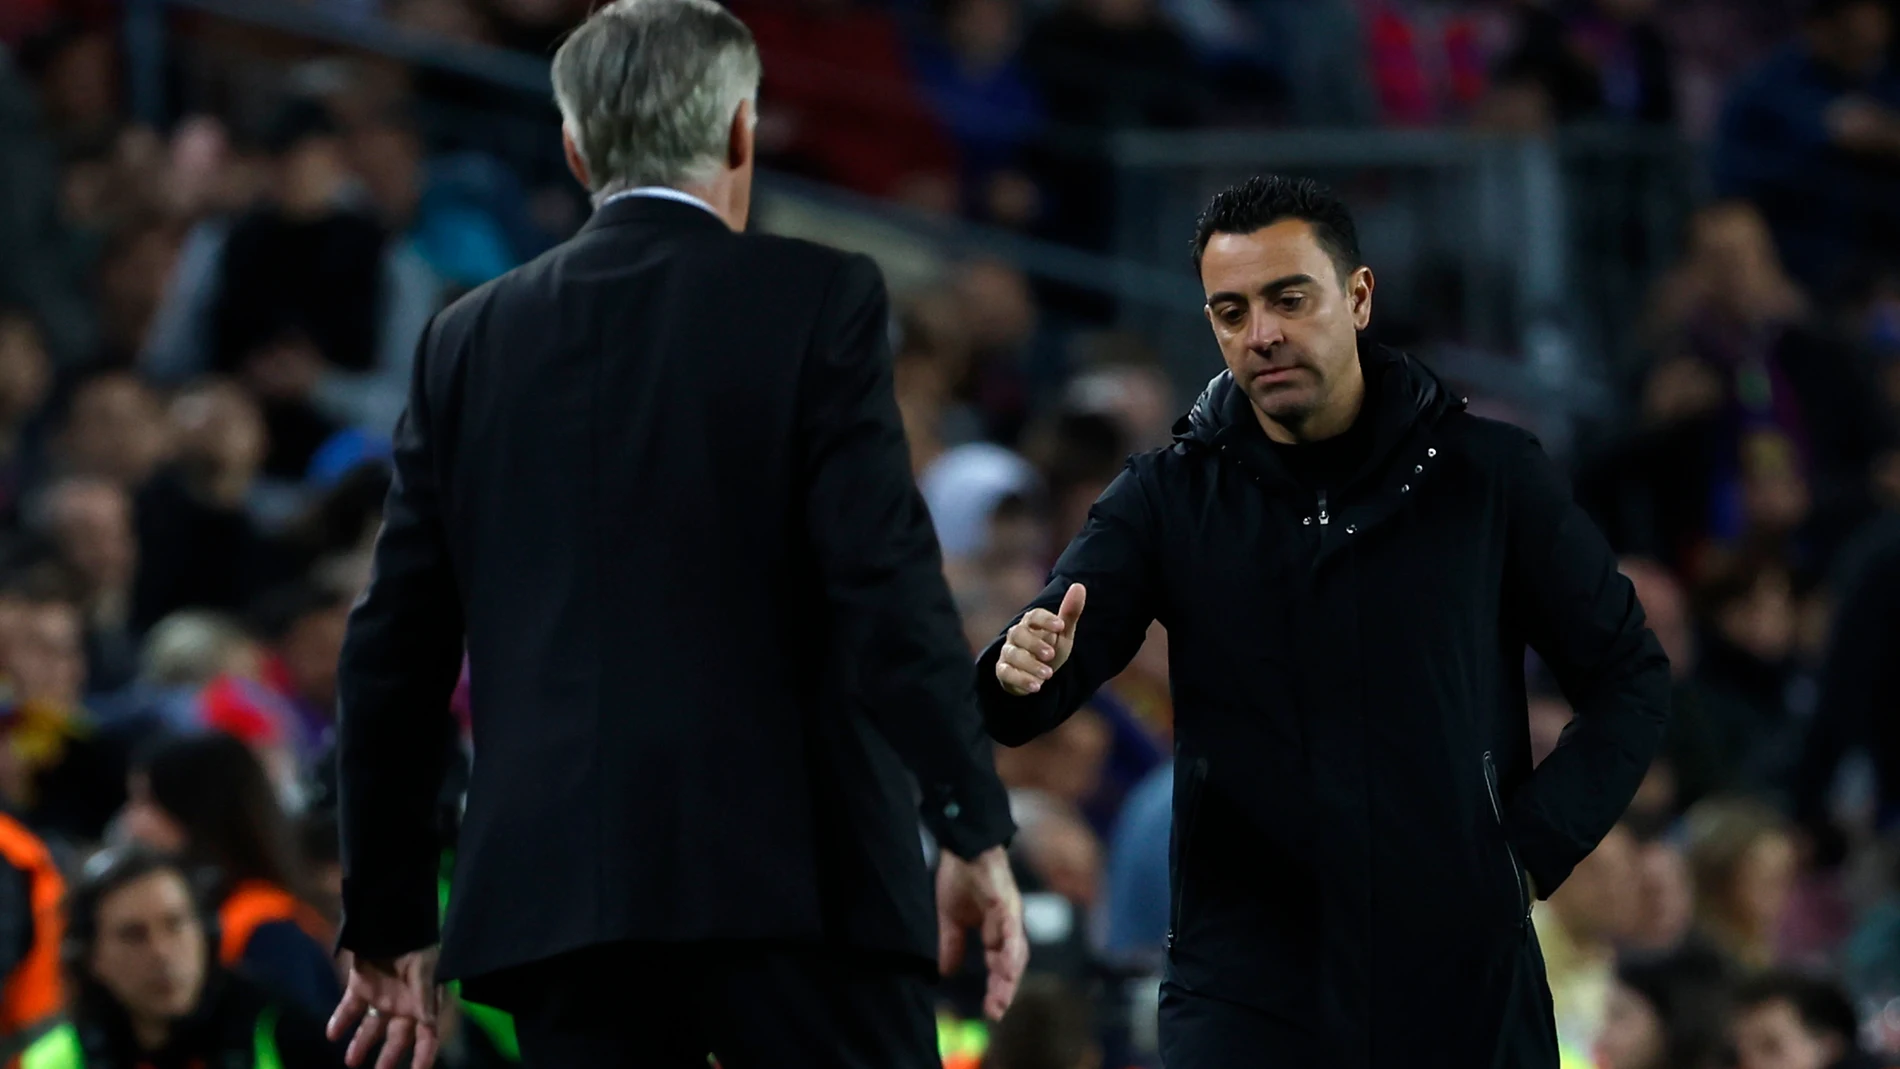 Barcelona's head coach Xavi Hernandez, right, greats Real Madrid's head coach Carlo Ancelottim at the end of the Spanish Copa del Rey semifinal, second leg soccer match between Barcelona and Real Madrid at the Camp Nou stadium in Barcelona, Spain, Wednesday, April 5, 2023. Real Madrid won 4-0. (AP Photo/Joan Monfort)